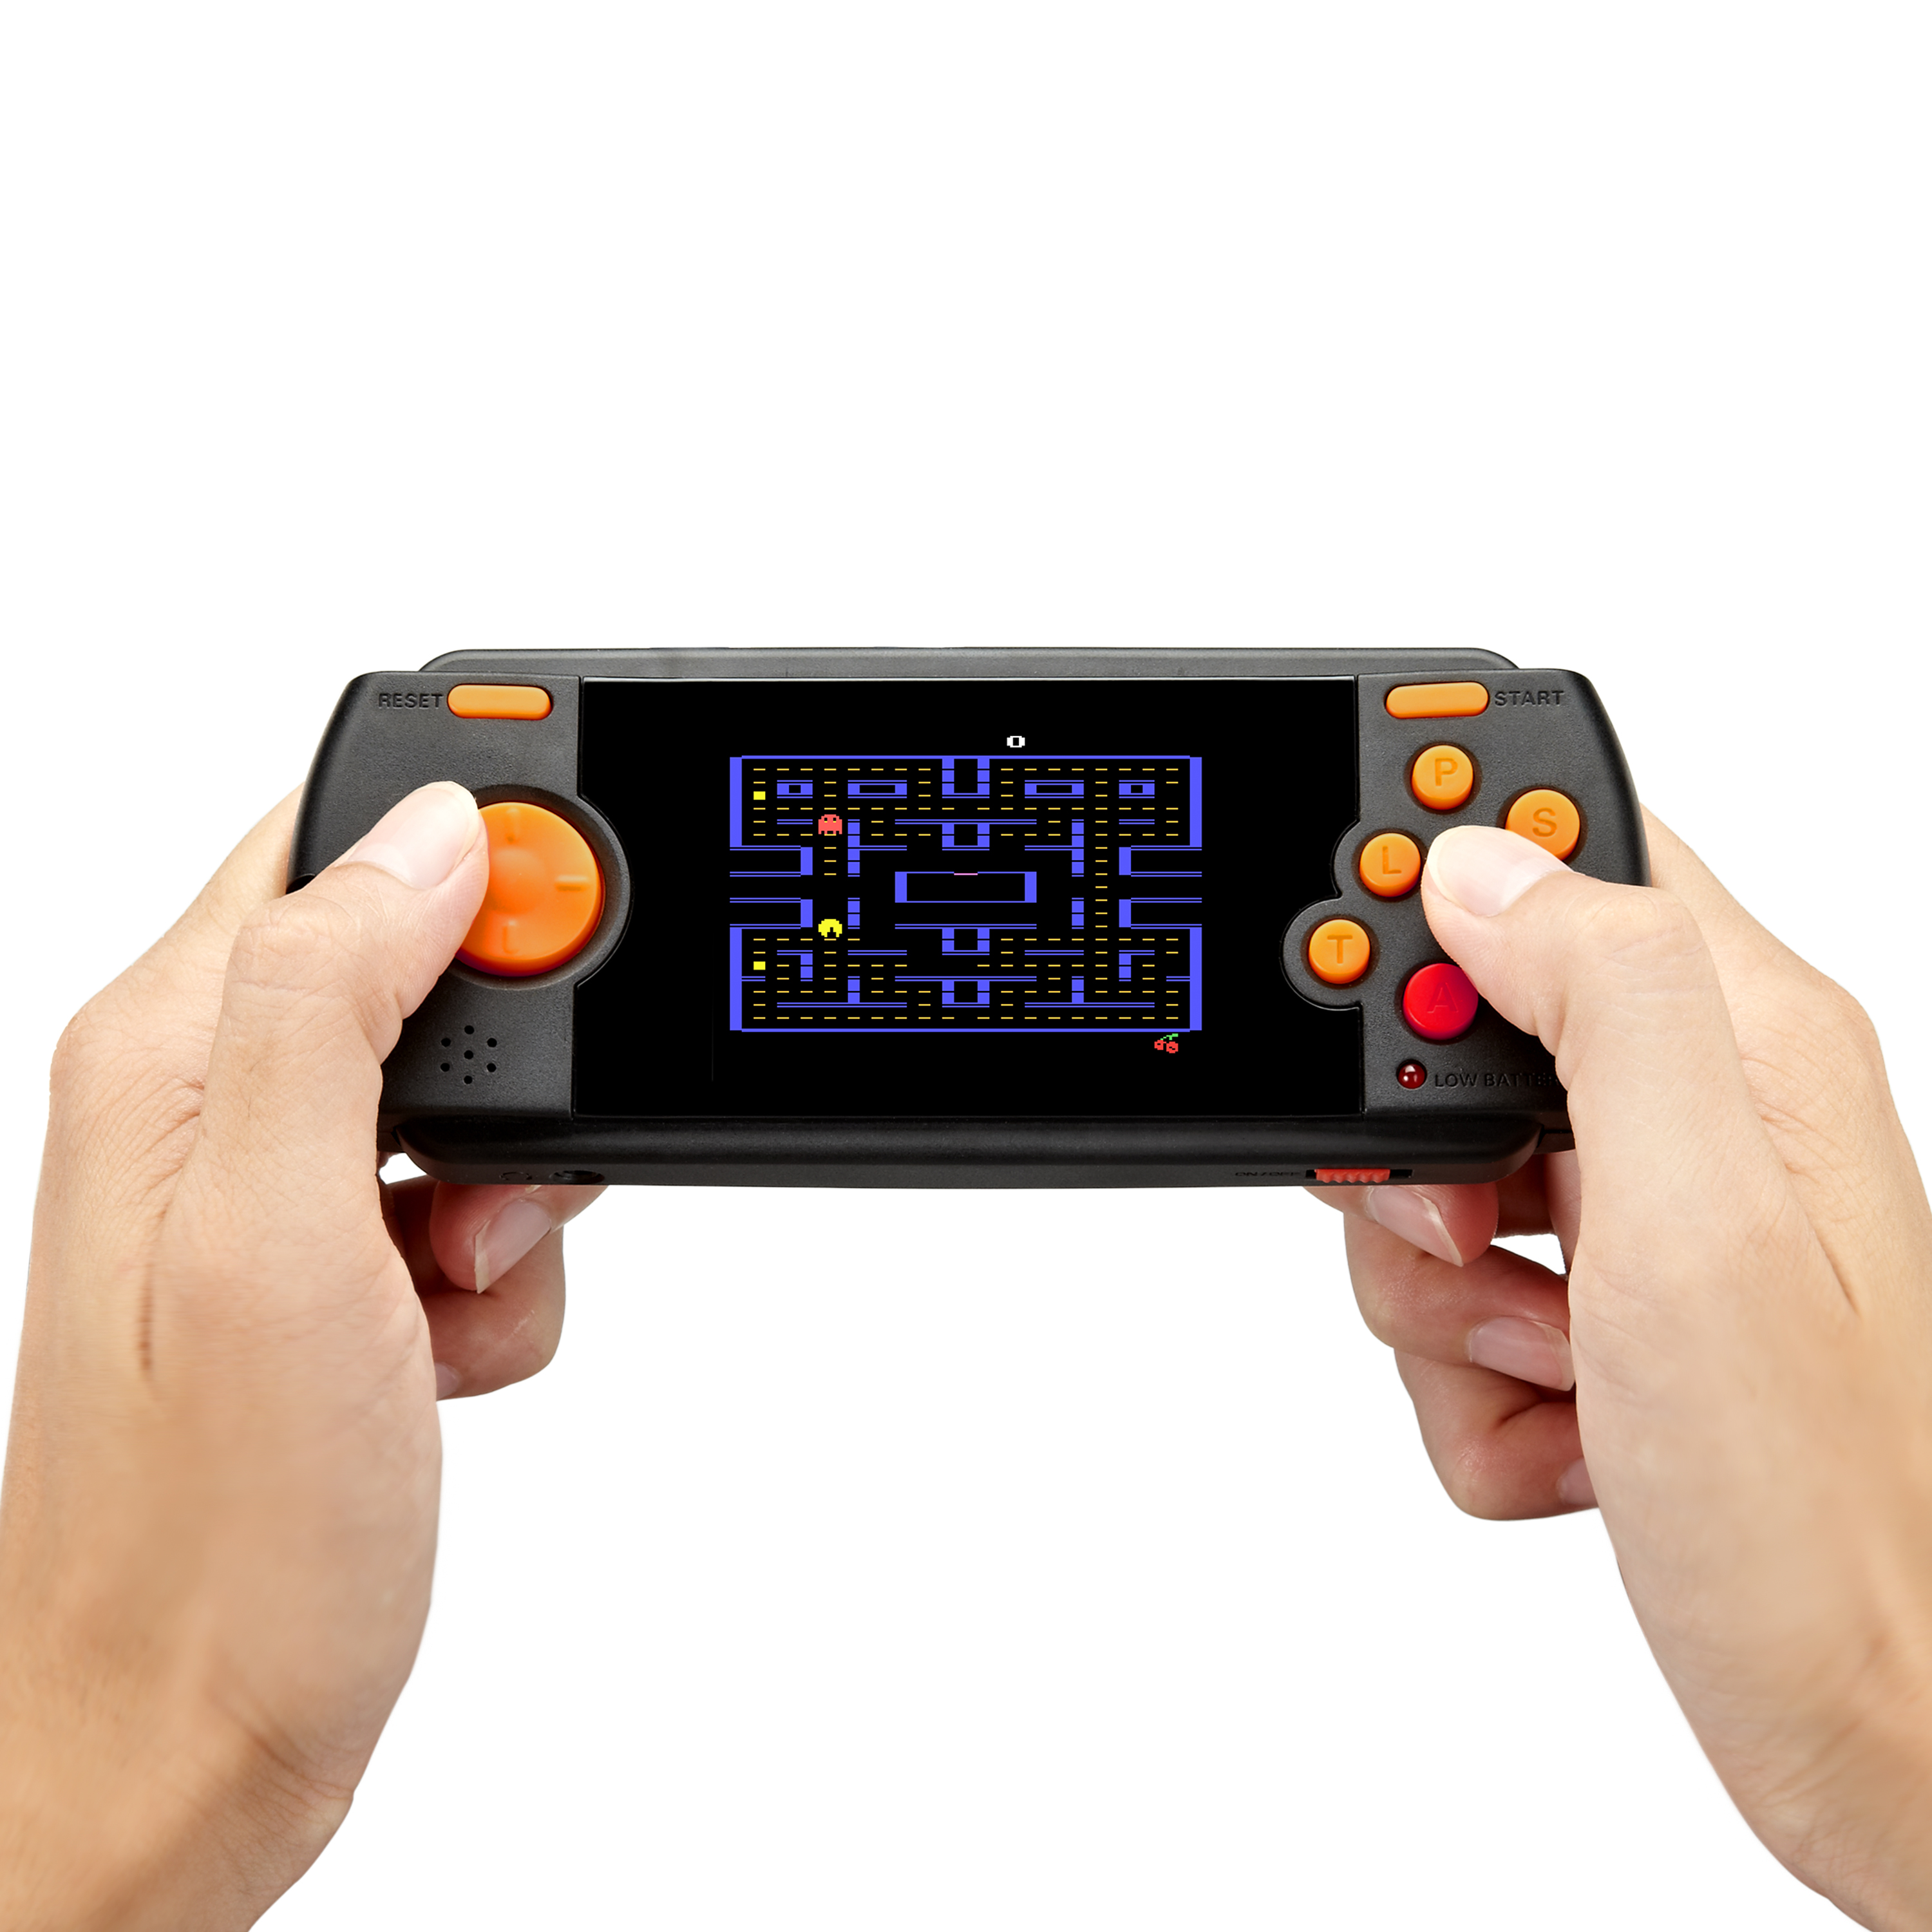 Atari Flashback Portable Game Player - Hand Held Game Console - image 3 of 4